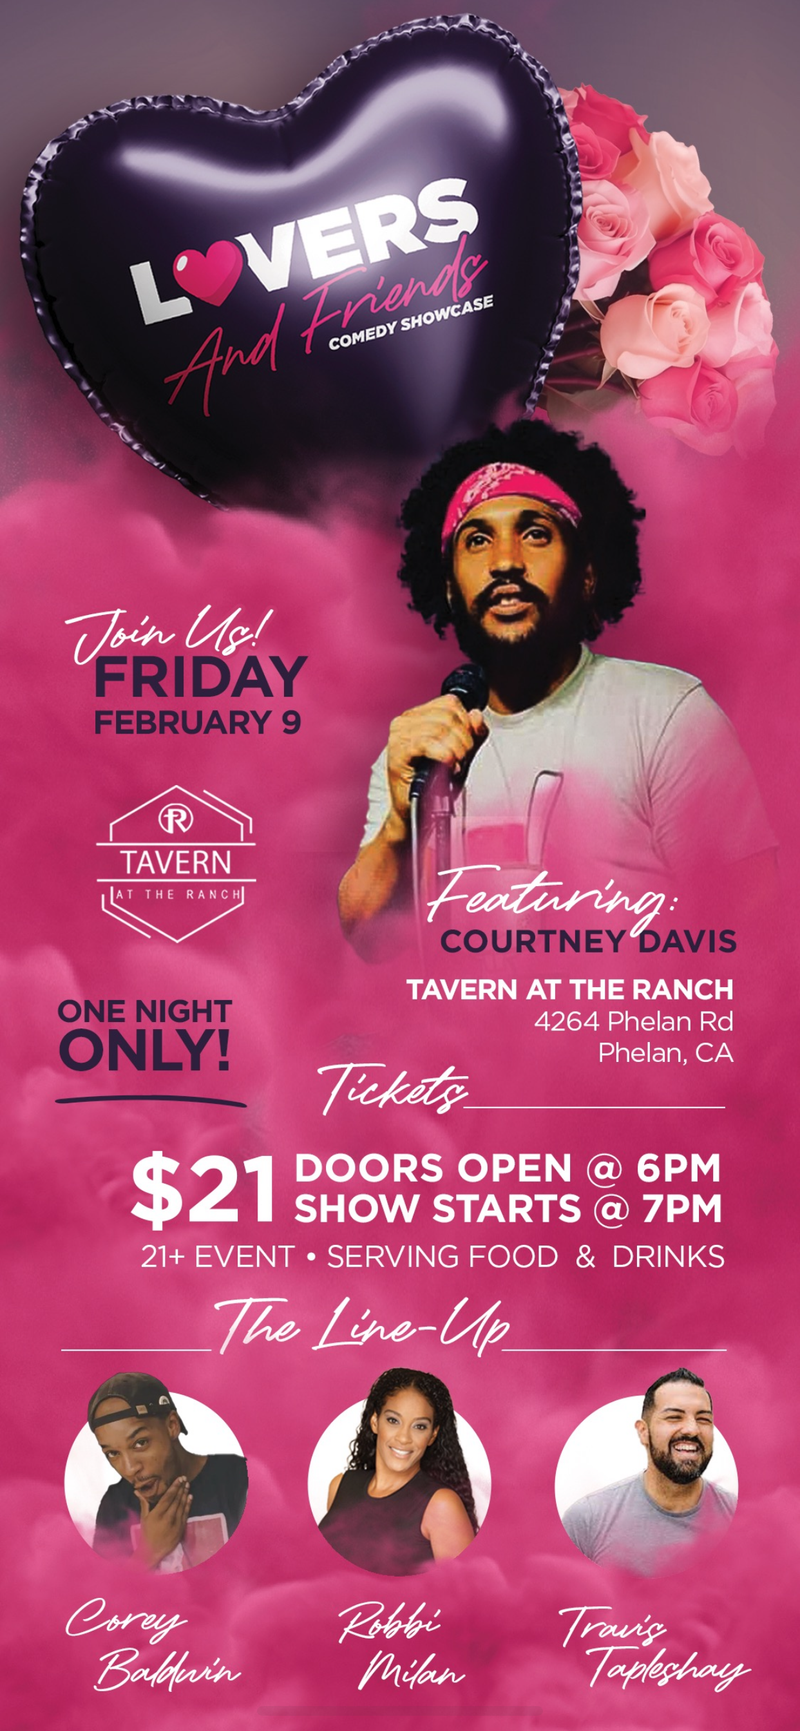 Lovers & Friends Comedy Showcase